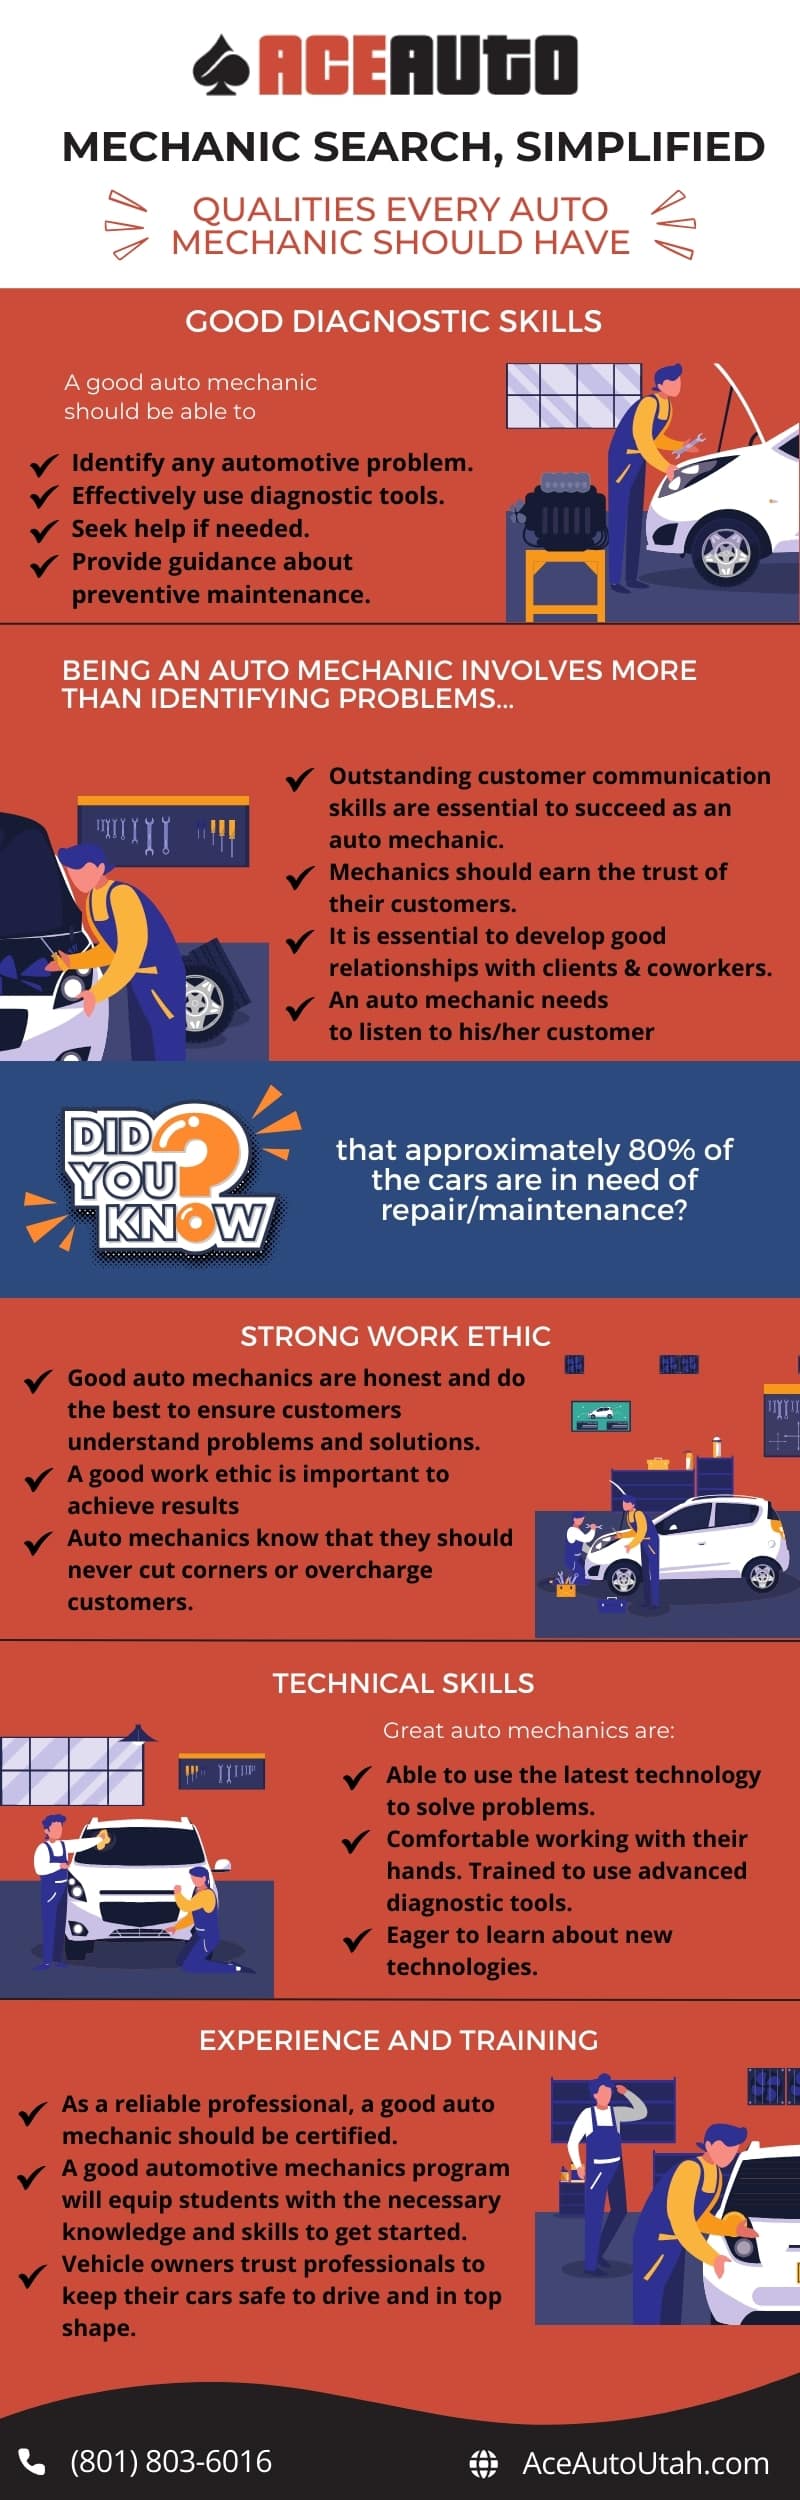 Infographic titled "Reliable Auto Mechanic Diagnostic Skills Simplified," depicting icons and illustrations related to qualities every auto mechanic should have, including problem-solving, communication, strong work ethic, and technical skills